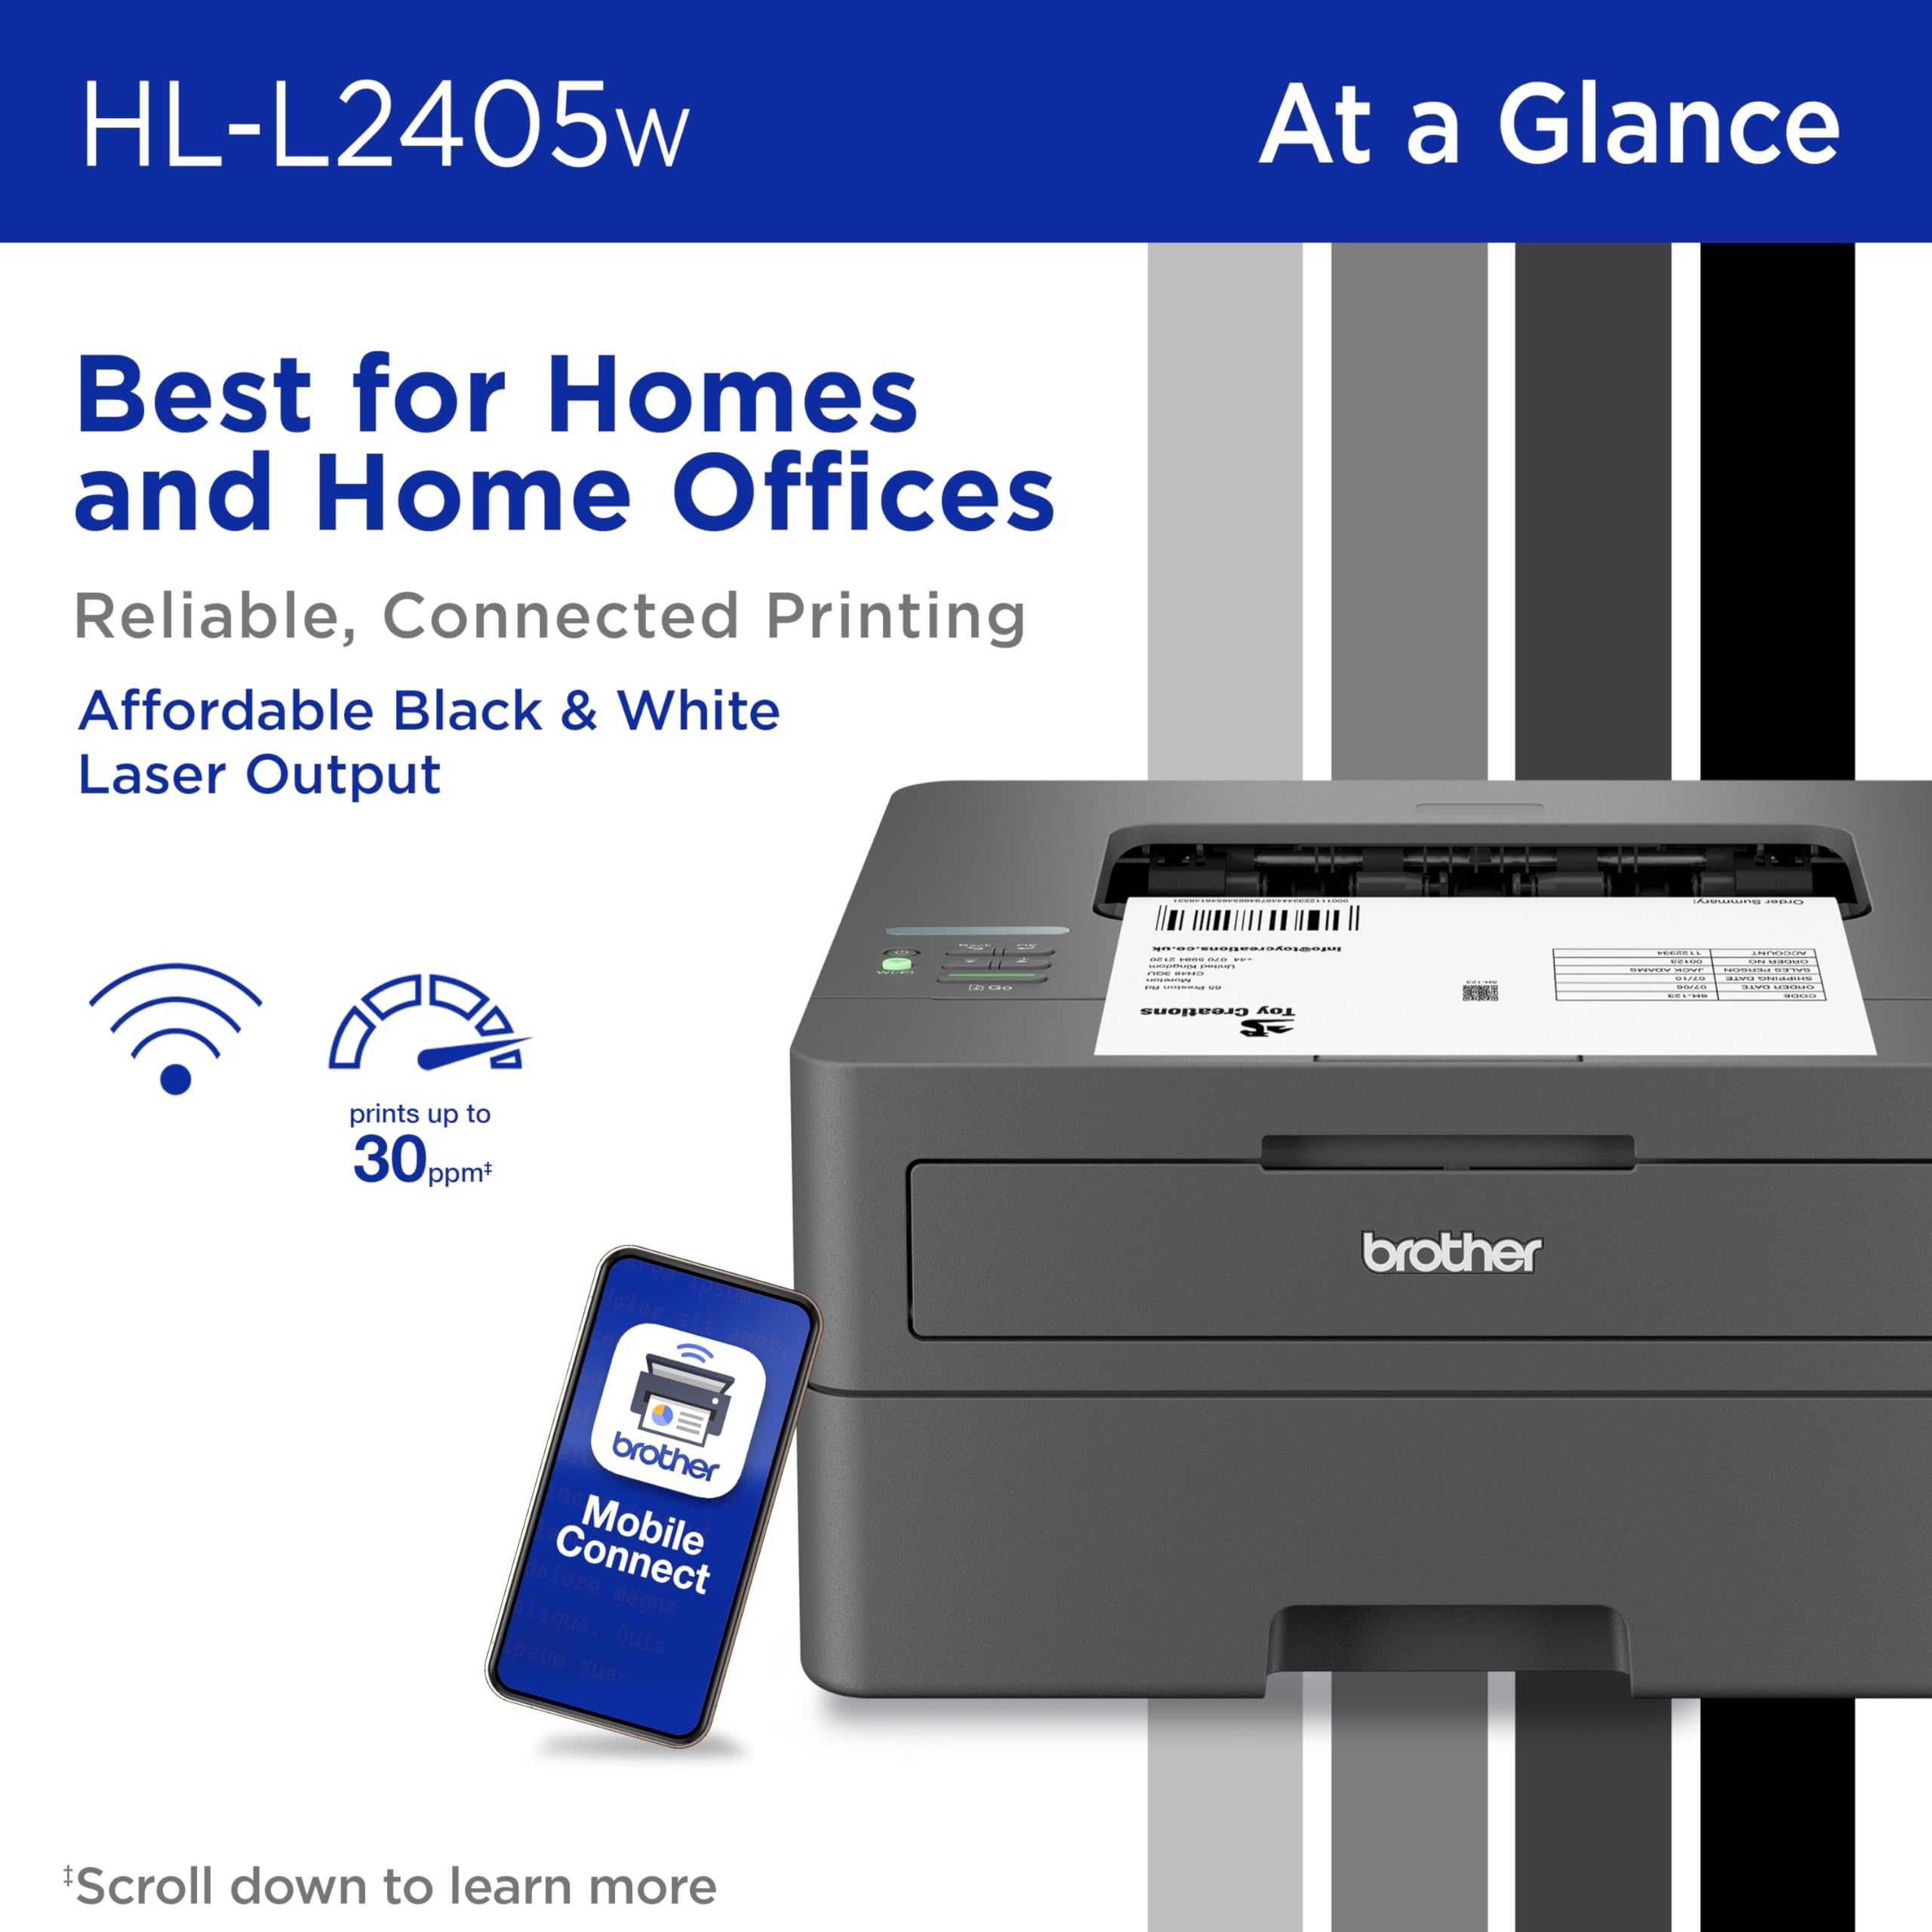 Brother HL-L2405W Wireless Compact Monochrome Laser Printer with Mobile Printing, Black & White Output | Includes Refresh Subscription Trial(1), Amazon Dash Replenishment Ready